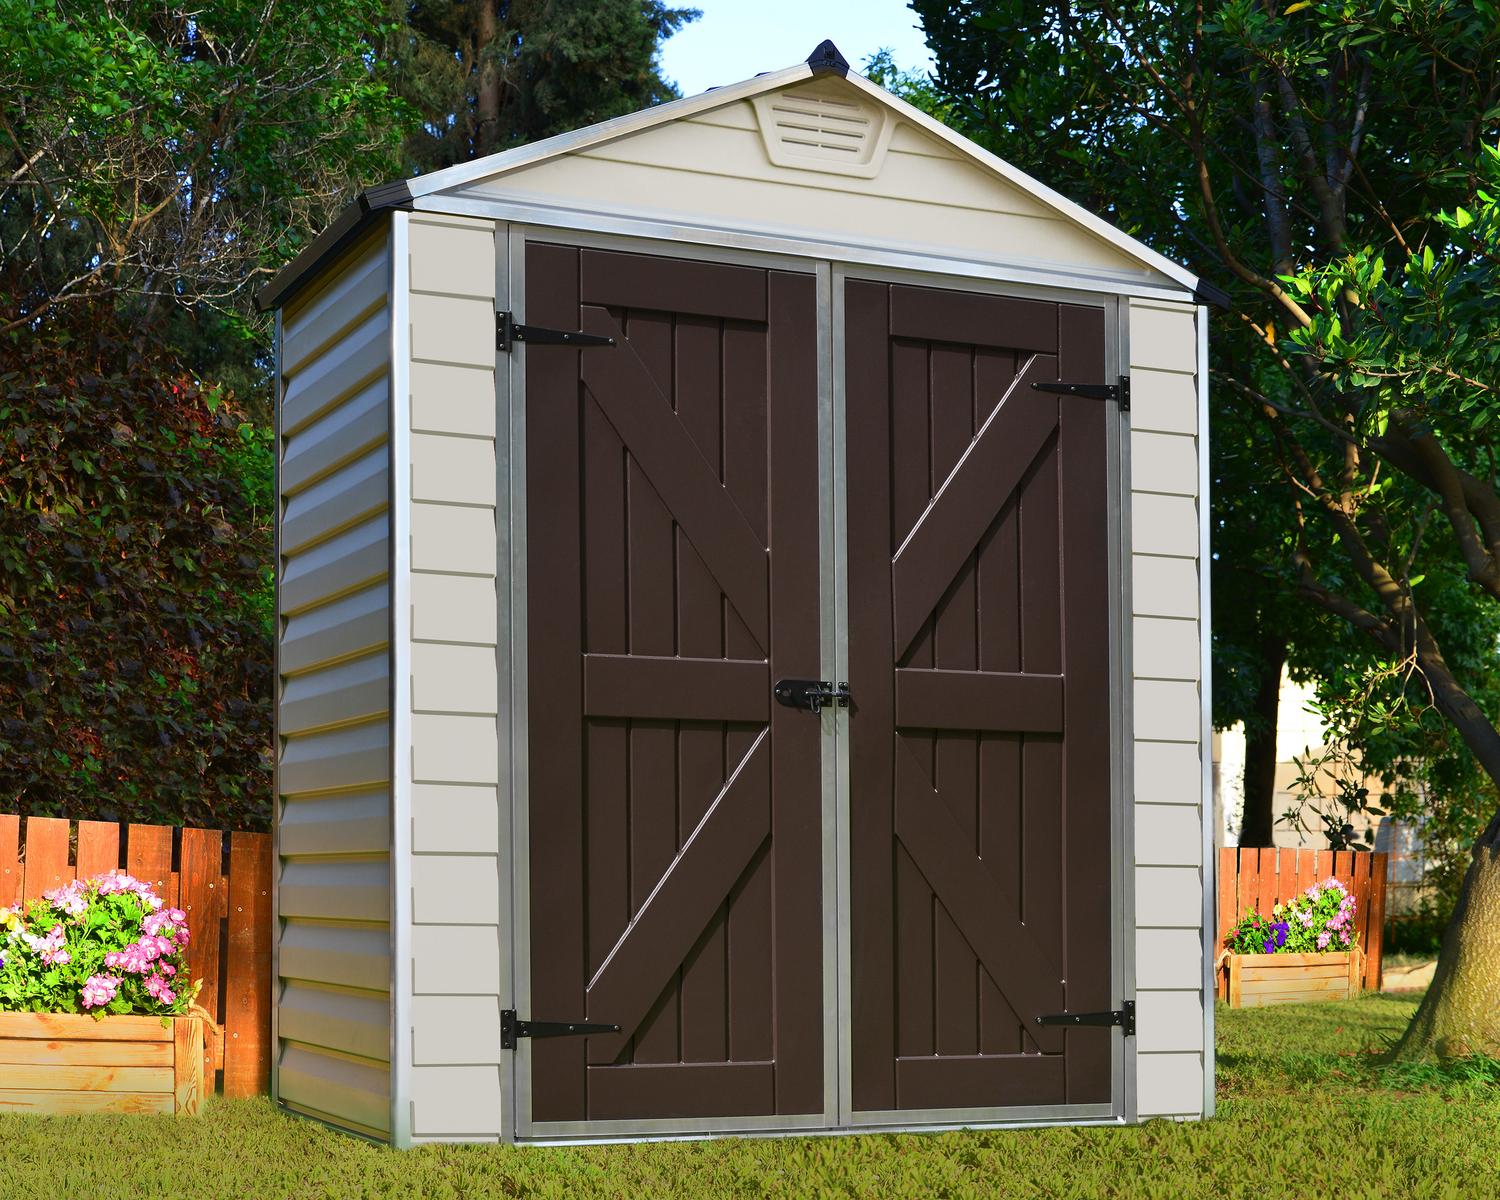 Skylight 6 ft. x 3 ft. Garden Storage Shed Plastic with Tan Polycarbonate Walls &amp; Aluminium Frame